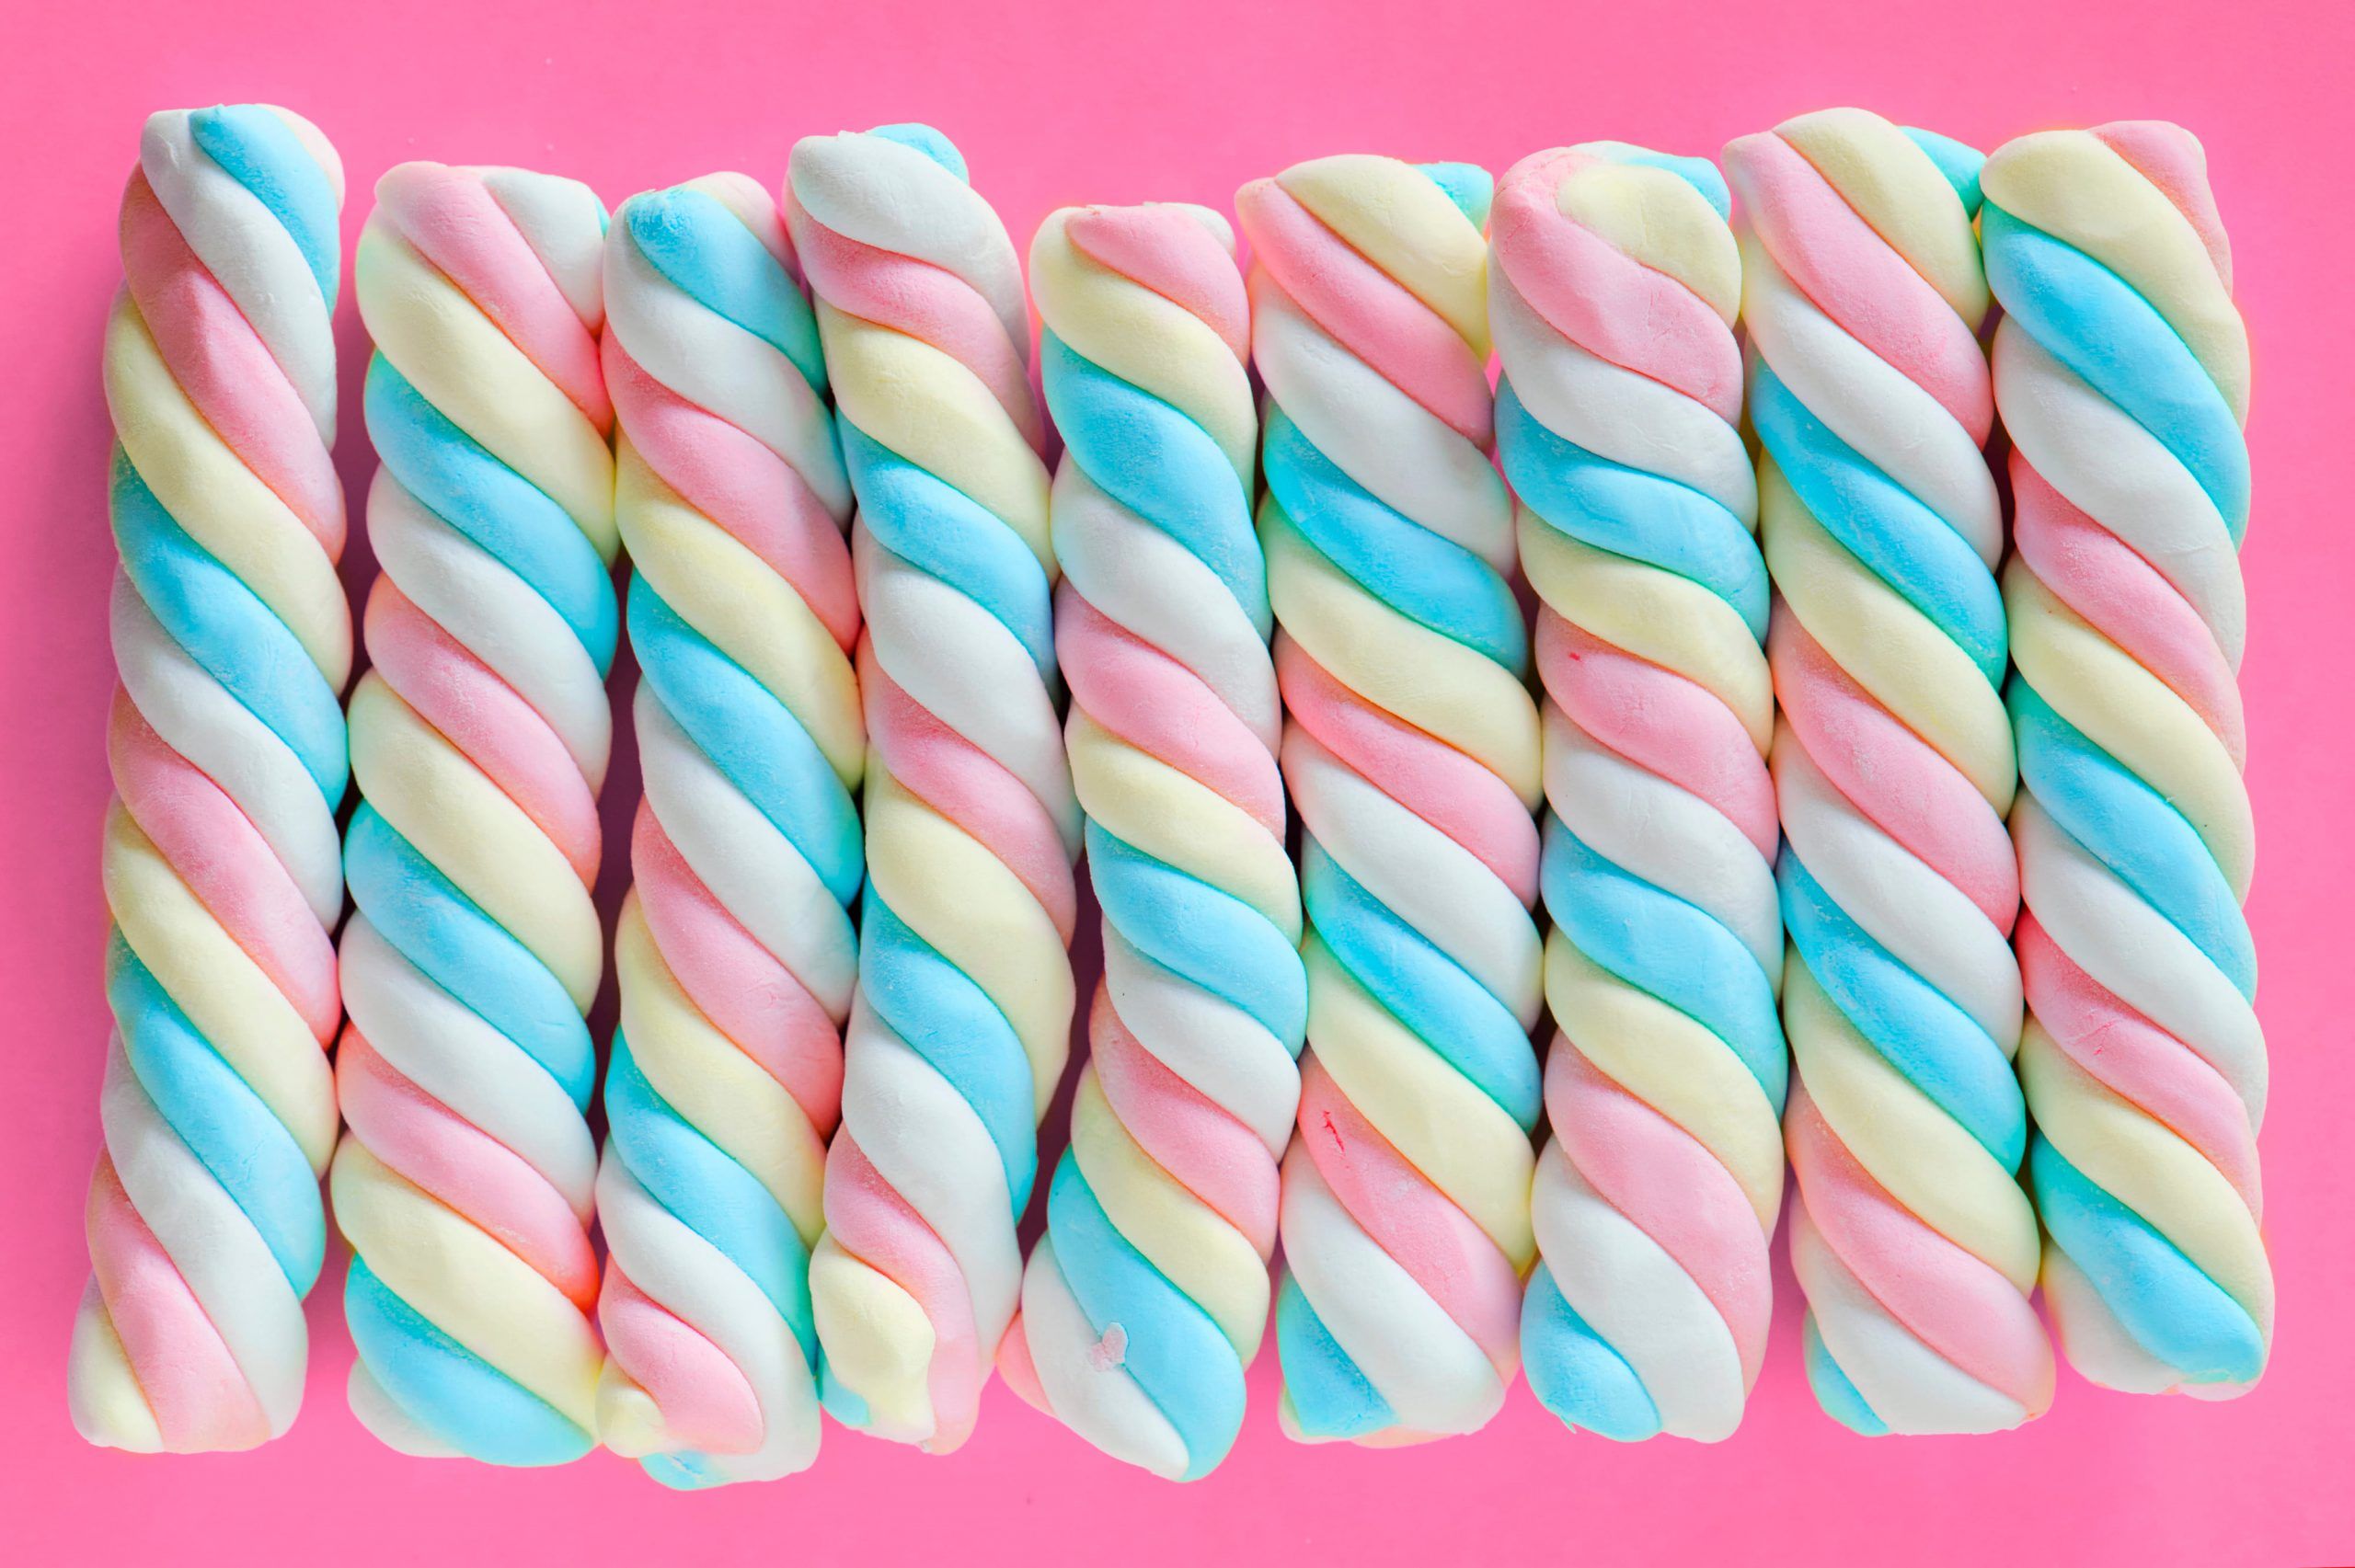 Candyroll Wallpaper, American, Background, Candy, Chewy, Closeup, Colorful